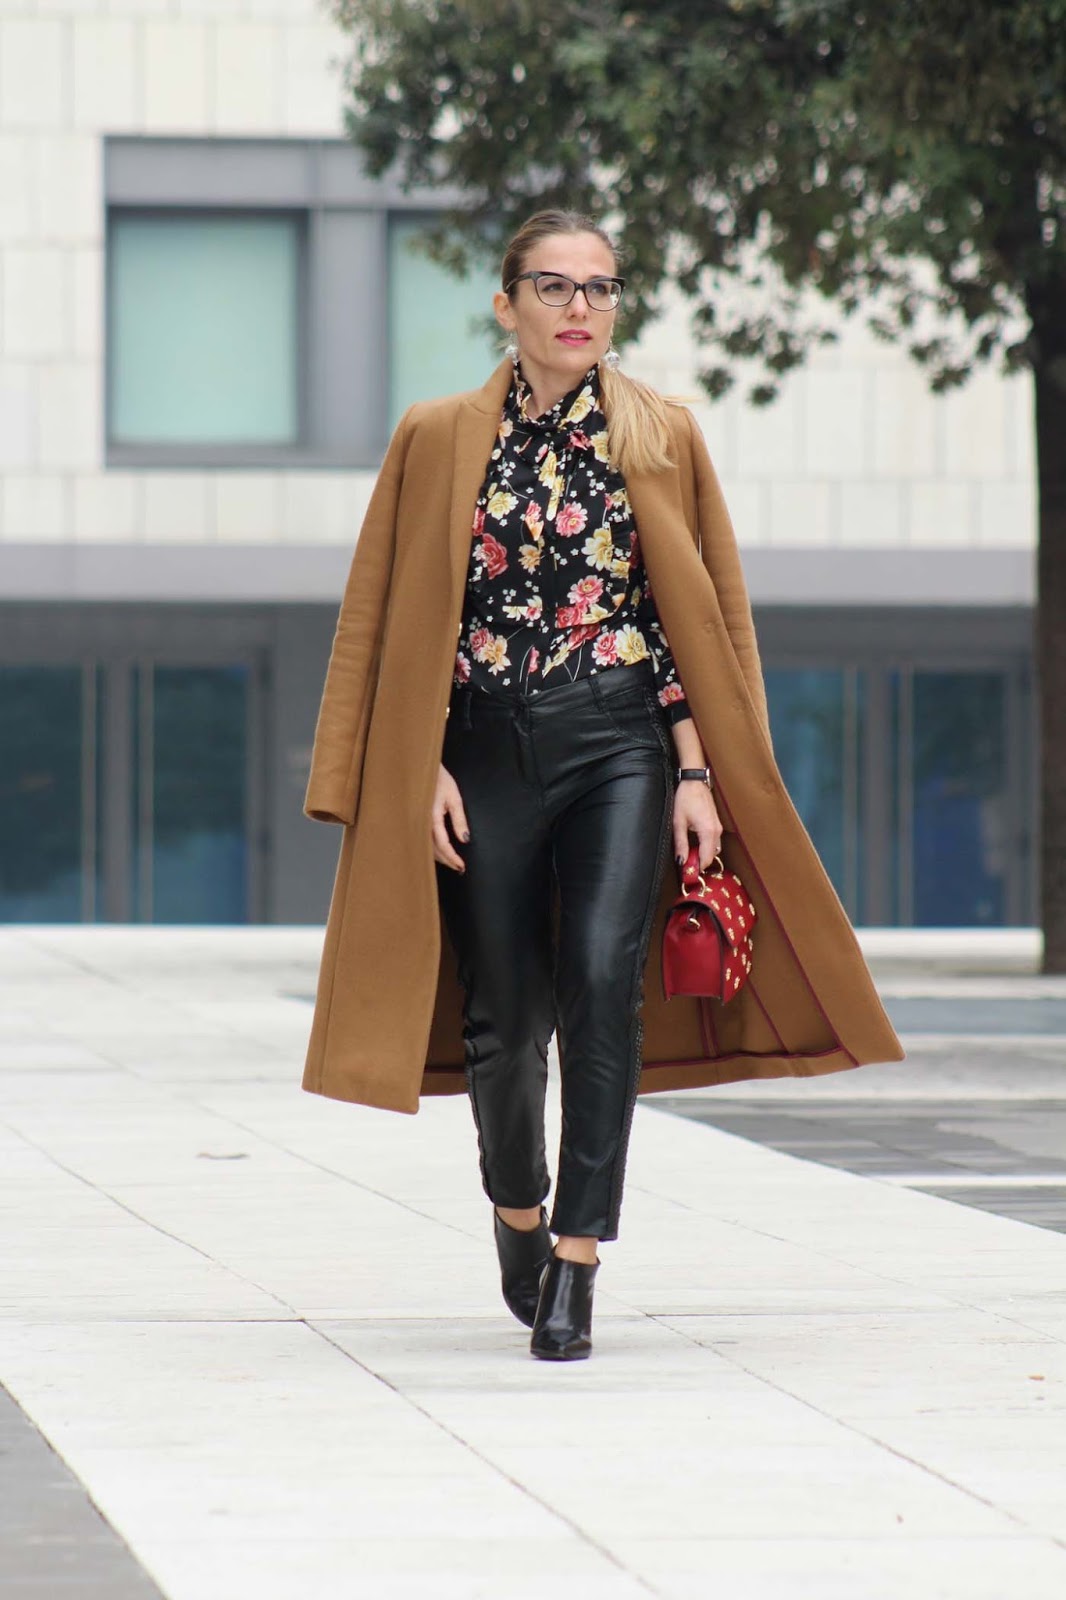 Eniwhere Fashion - Camel coat and floral shirt - Coto Privado